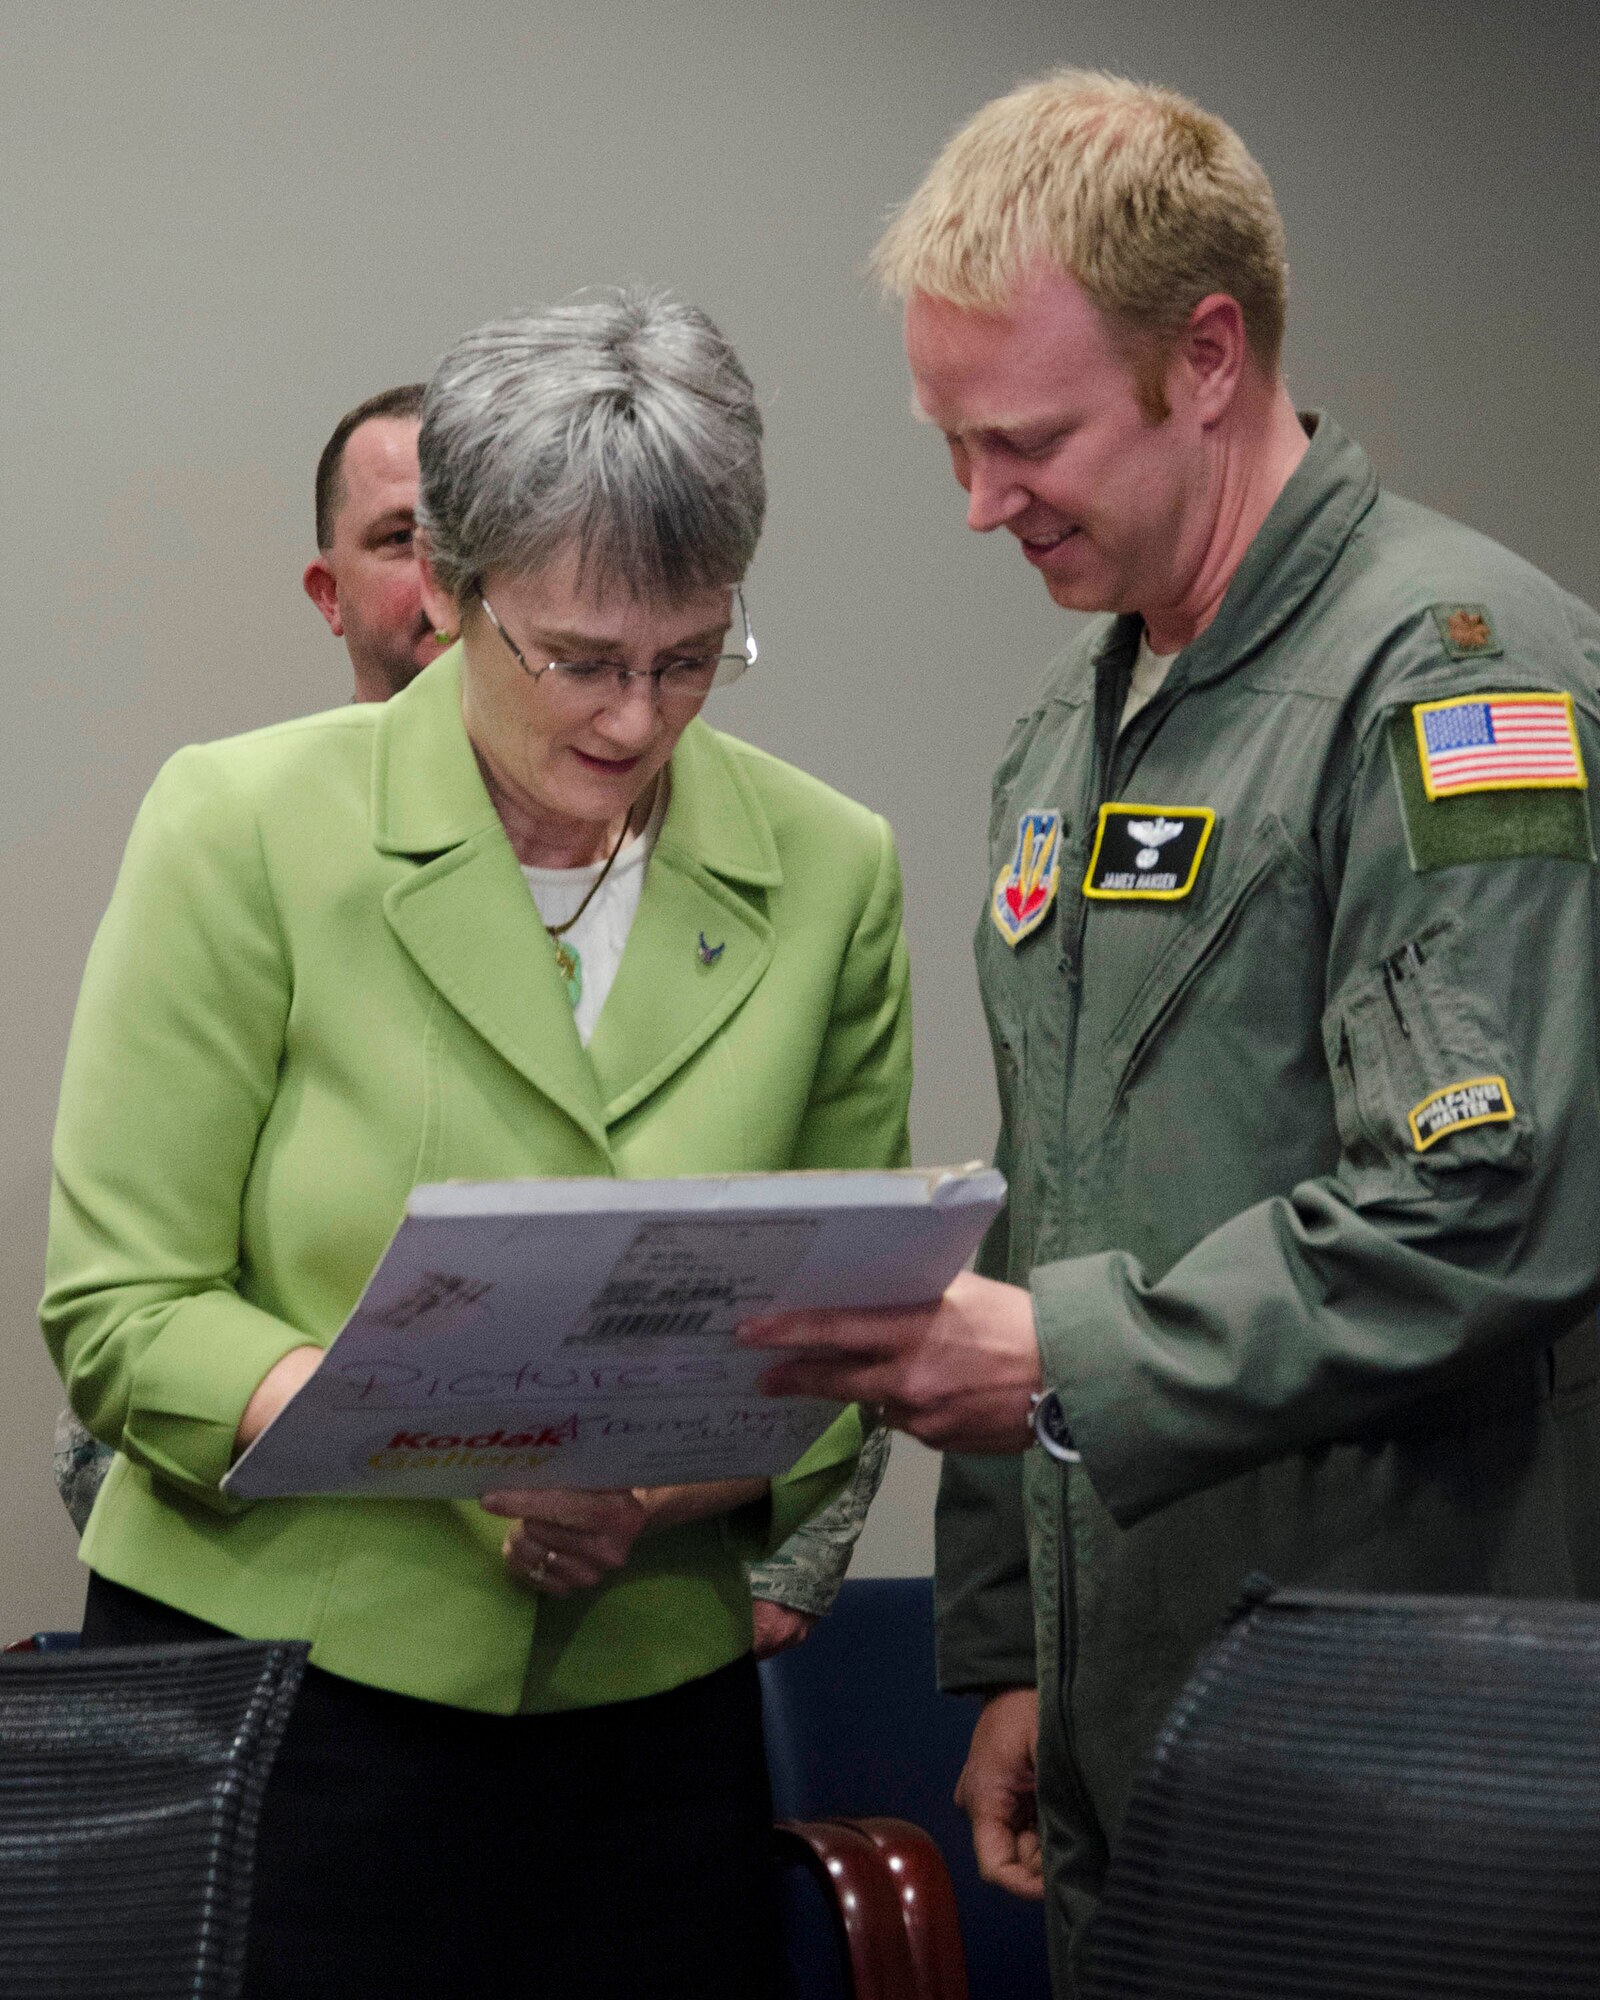 Maj. James A. Hansen II, director of operations, Air Force Technical Applications Center, Patrick AFB, Fla., watches as Secretary of the Air Force Heather Wilson autographs a photo from Hansen’s U.S. Air Force Academy graduation ceremony.  Wilson sponsored Hansen when she was a U.S. representative for the state of New Mexico, and was pictured in the photo with Hansen and President George W. Bush.  (U.S. Air Force photo by Susan A. Romano)